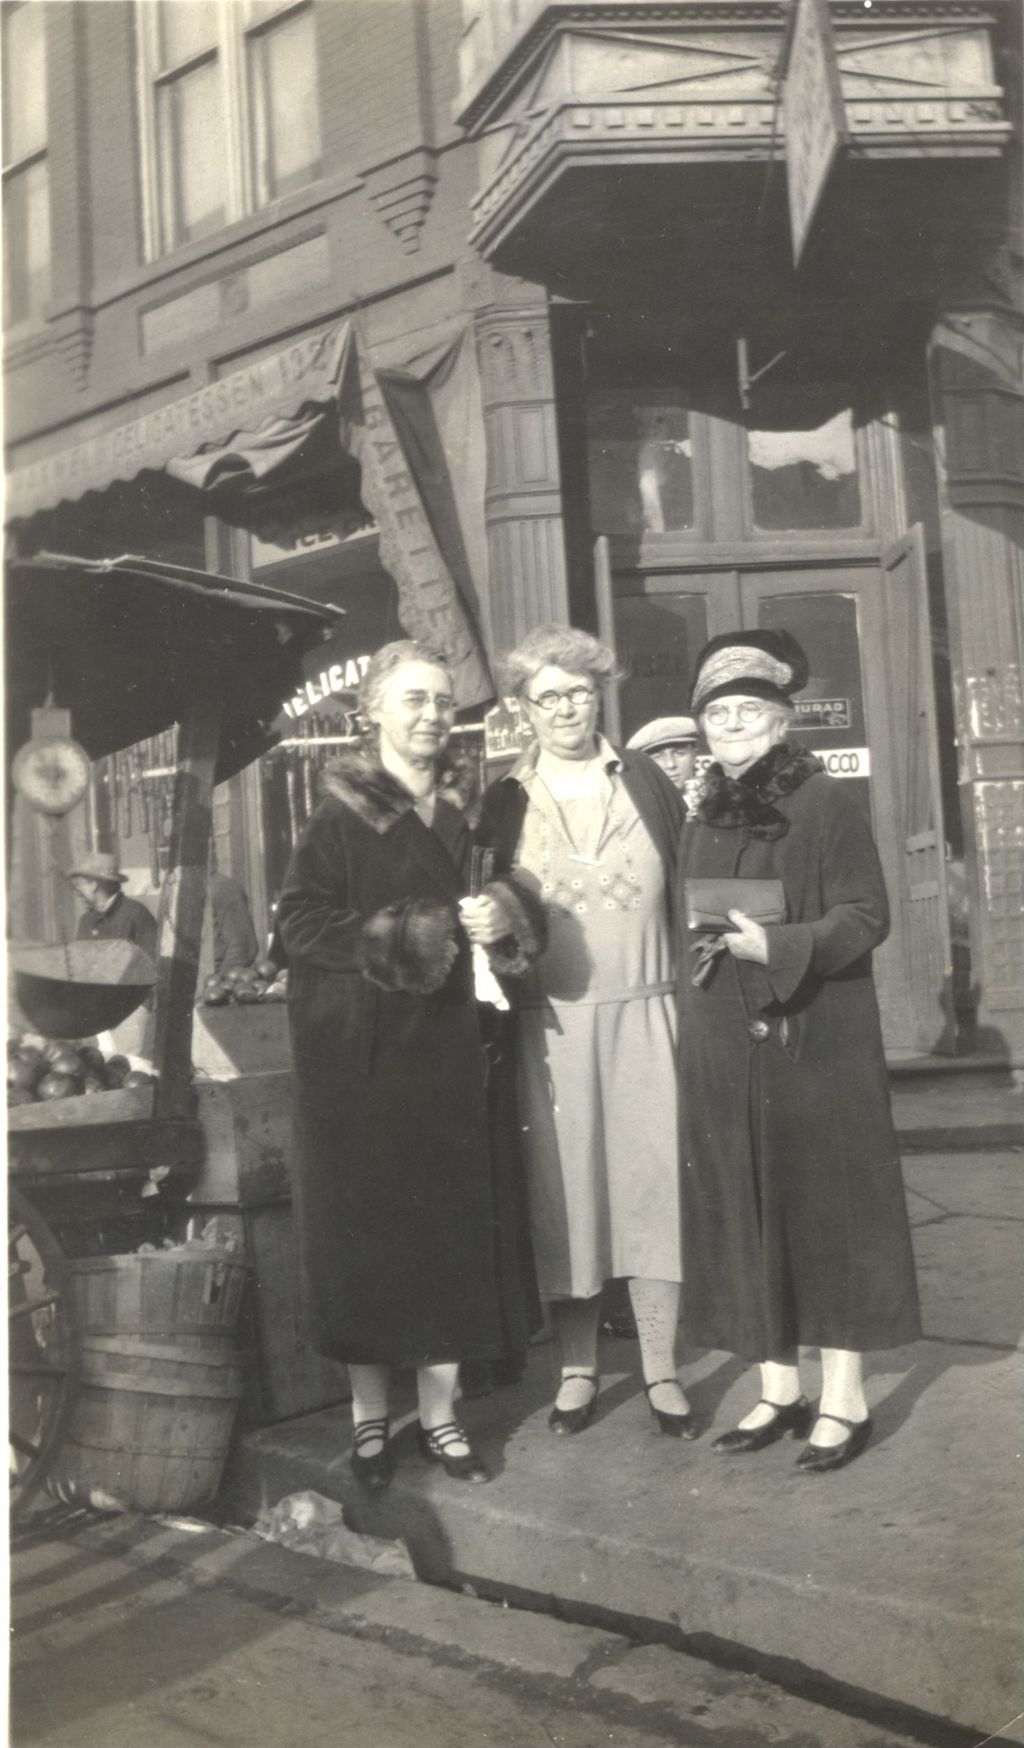 Anna Heistad with two other women